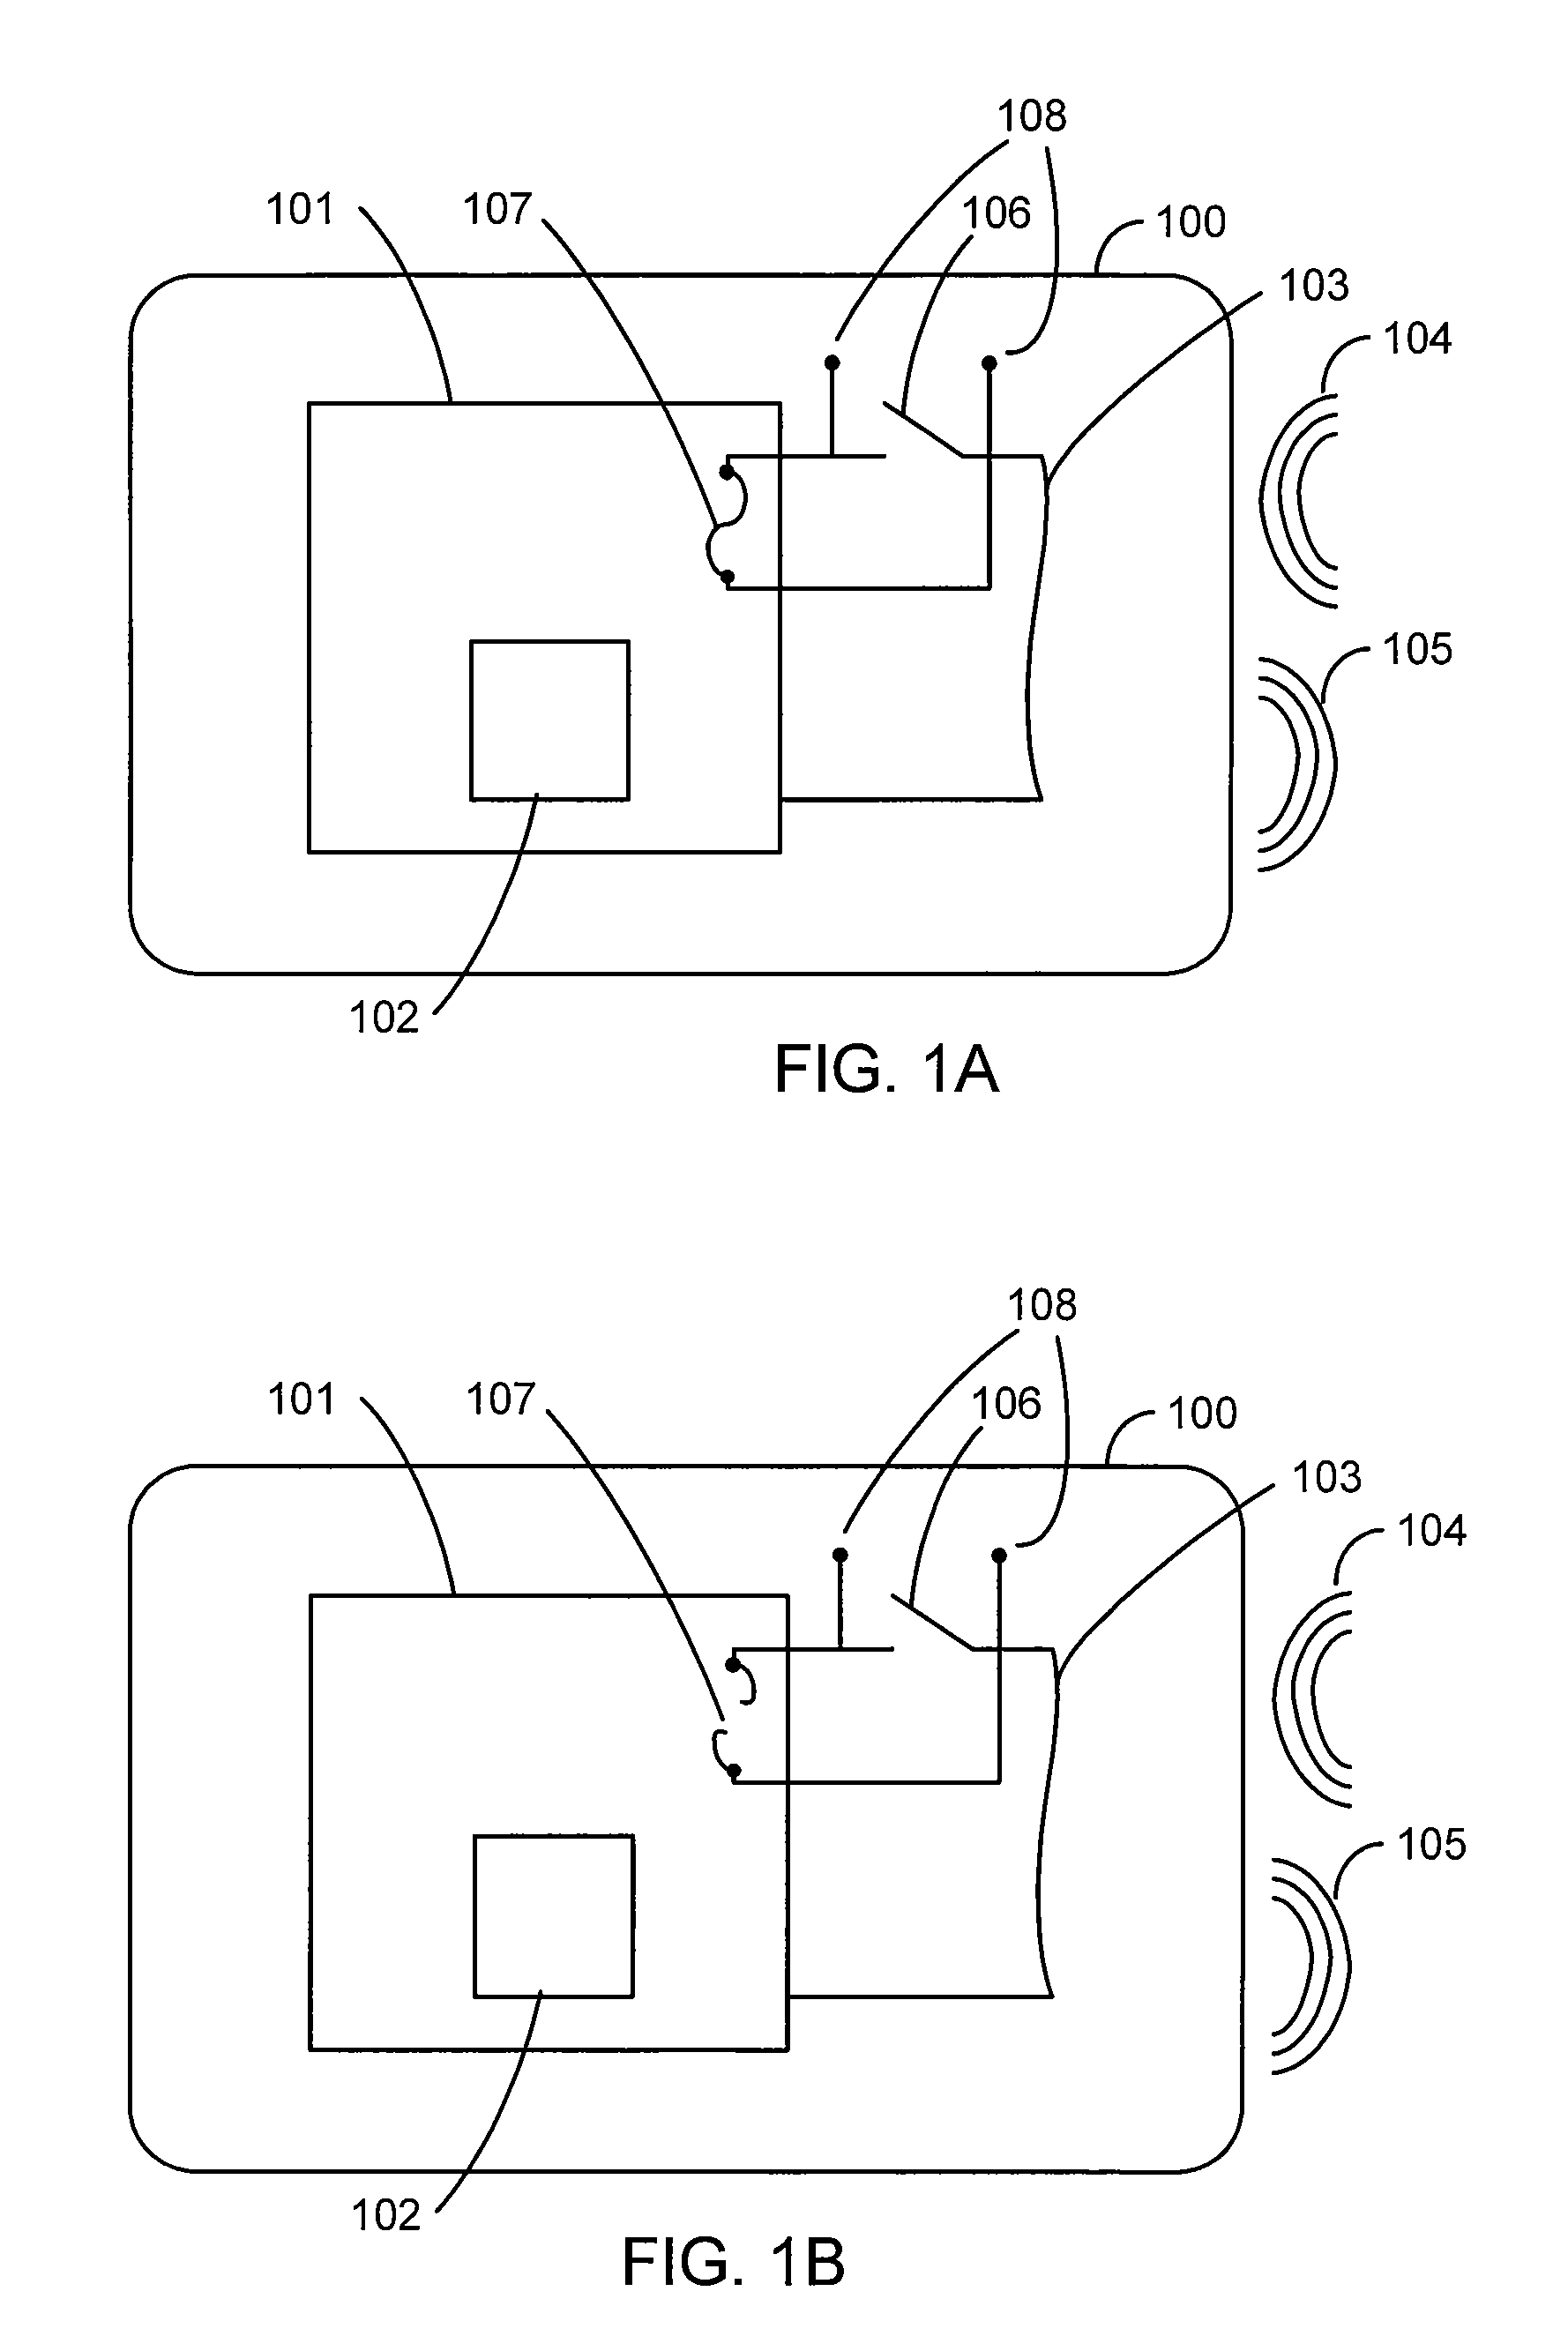 Manufacturing system to produce contactless devices with switches